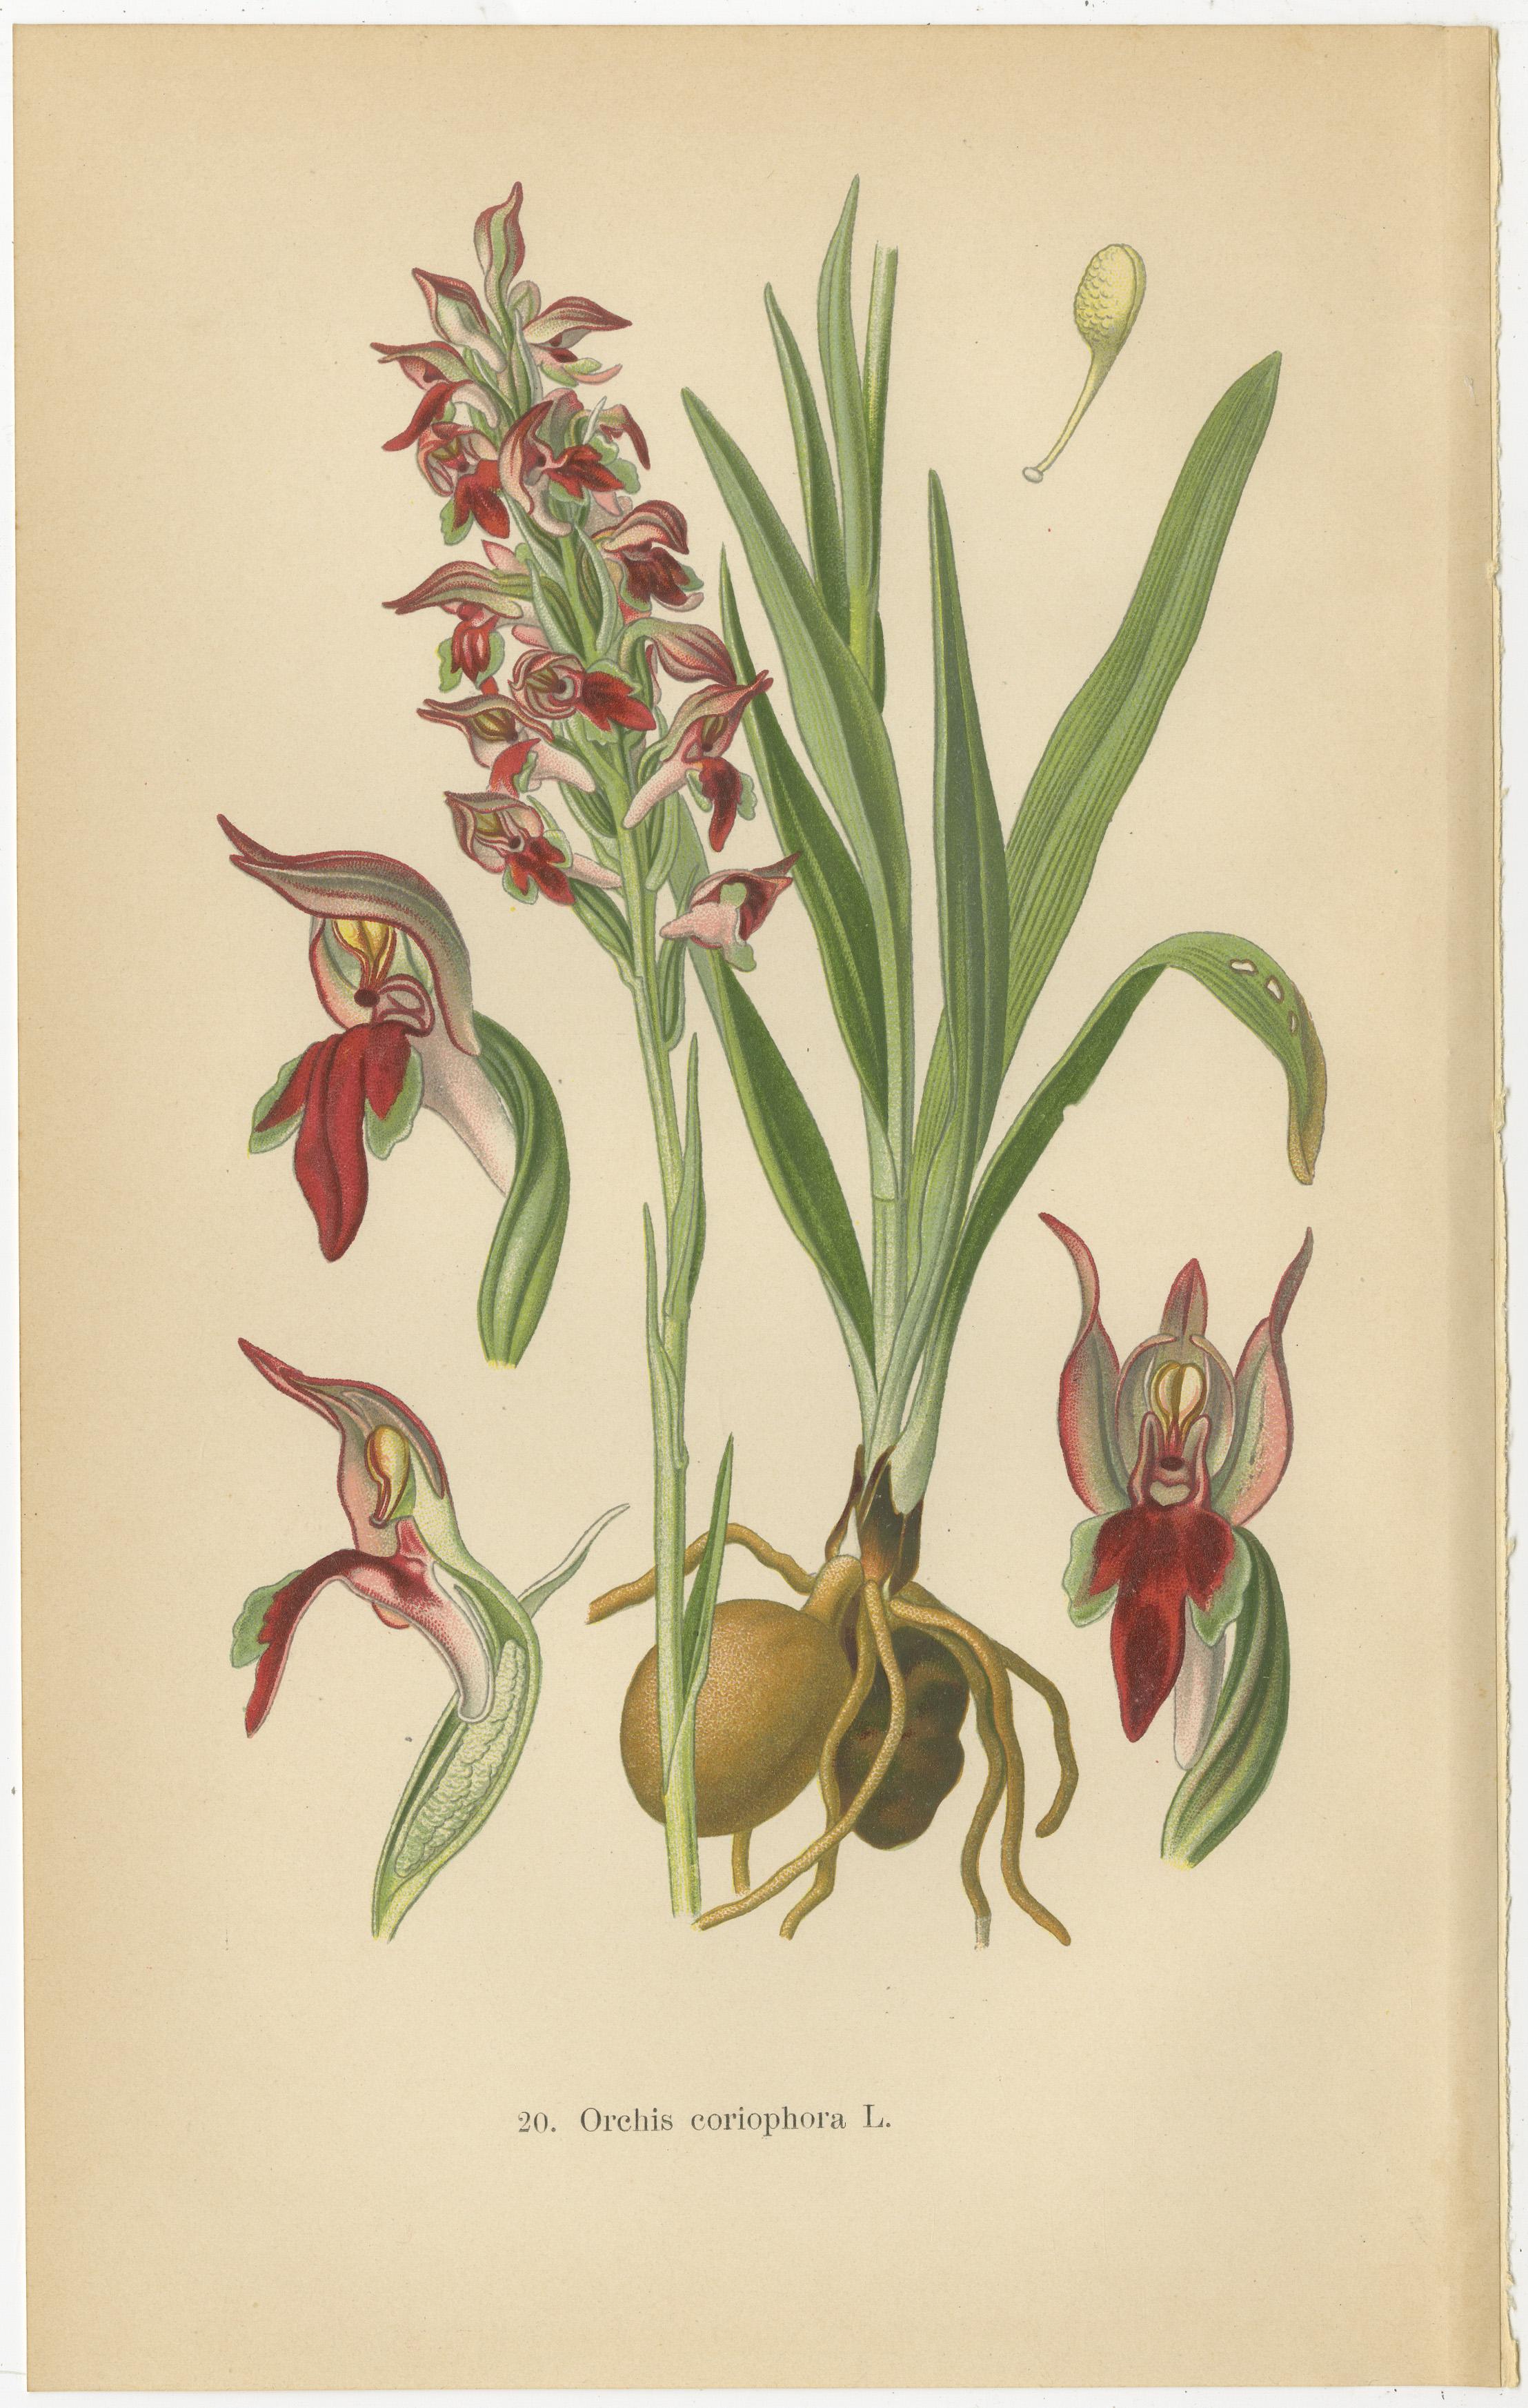 Paper Nature's Masterpieces in Original Antique Print: The Orchids of 1904 For Sale